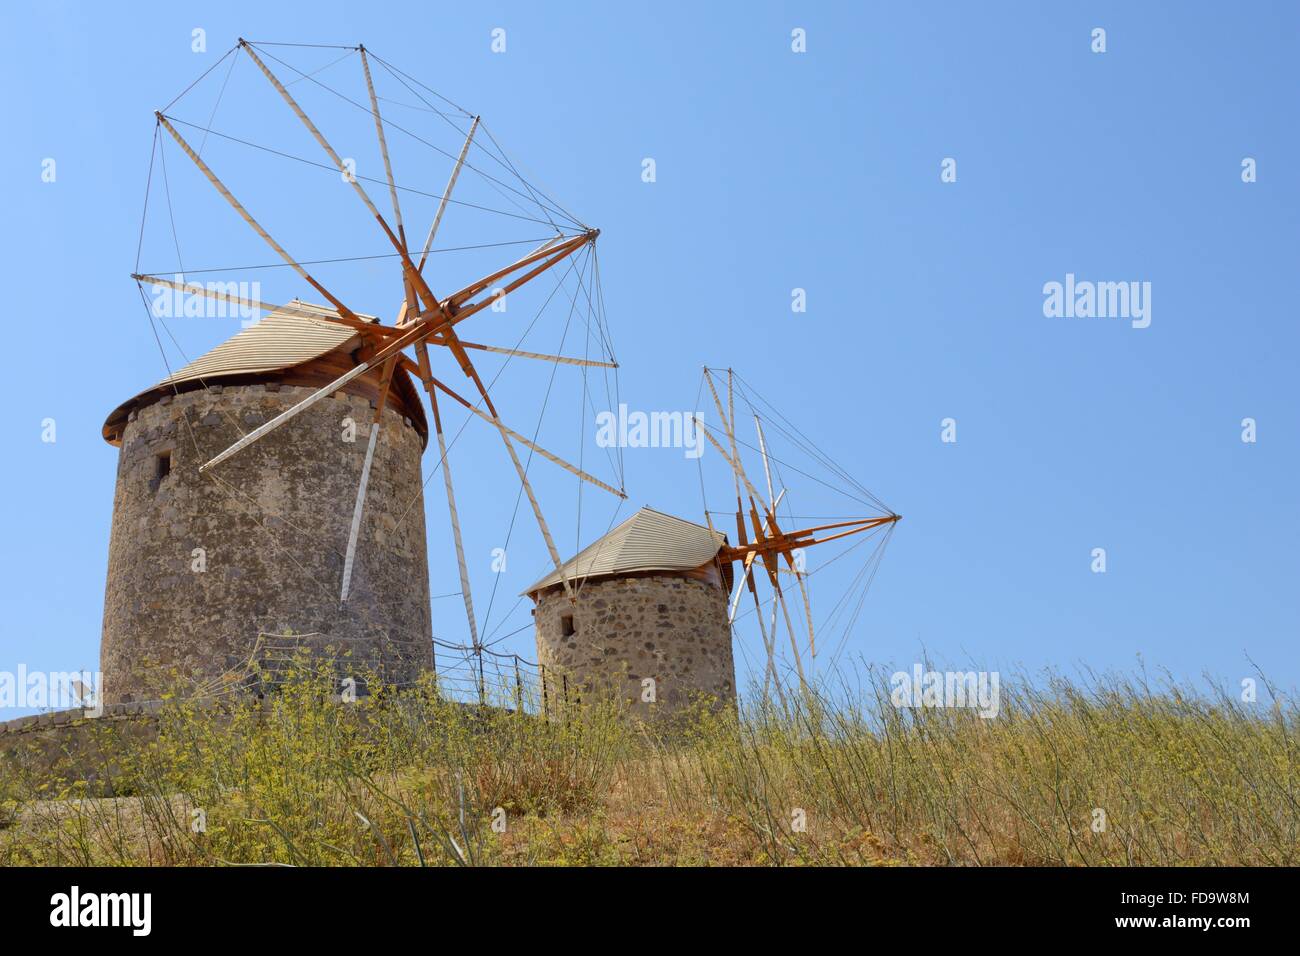 Restored windmills of the Monastery of St. John the Theologian, Chora, Patmos, Dodecanese Islands, Greece. Stock Photo